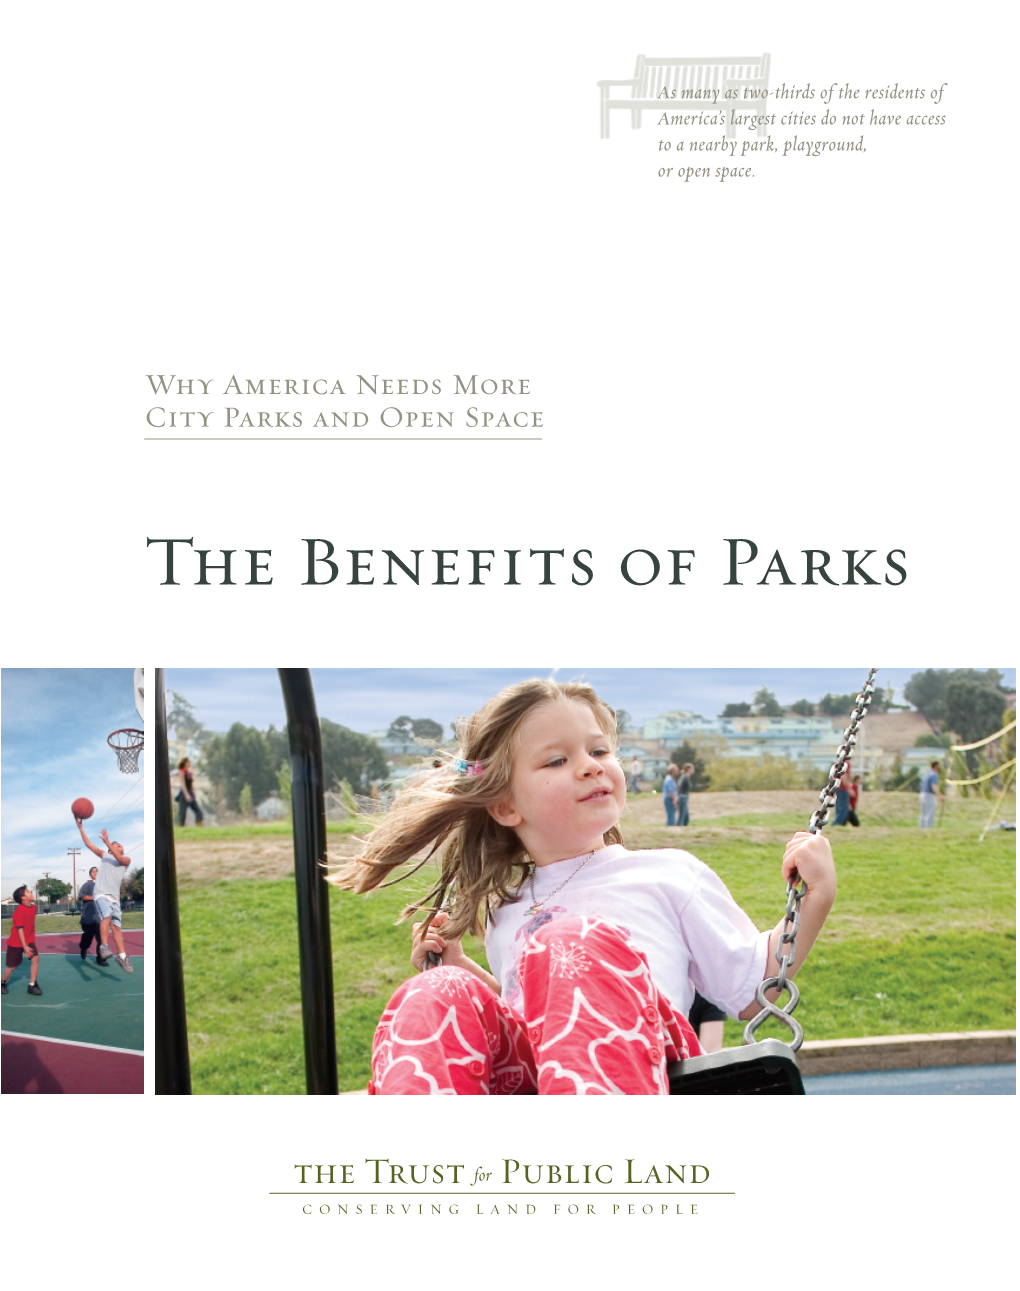 Economic Benefits of Parks and Open Space (San Francisco: the Trust for Public Land, 1999), P